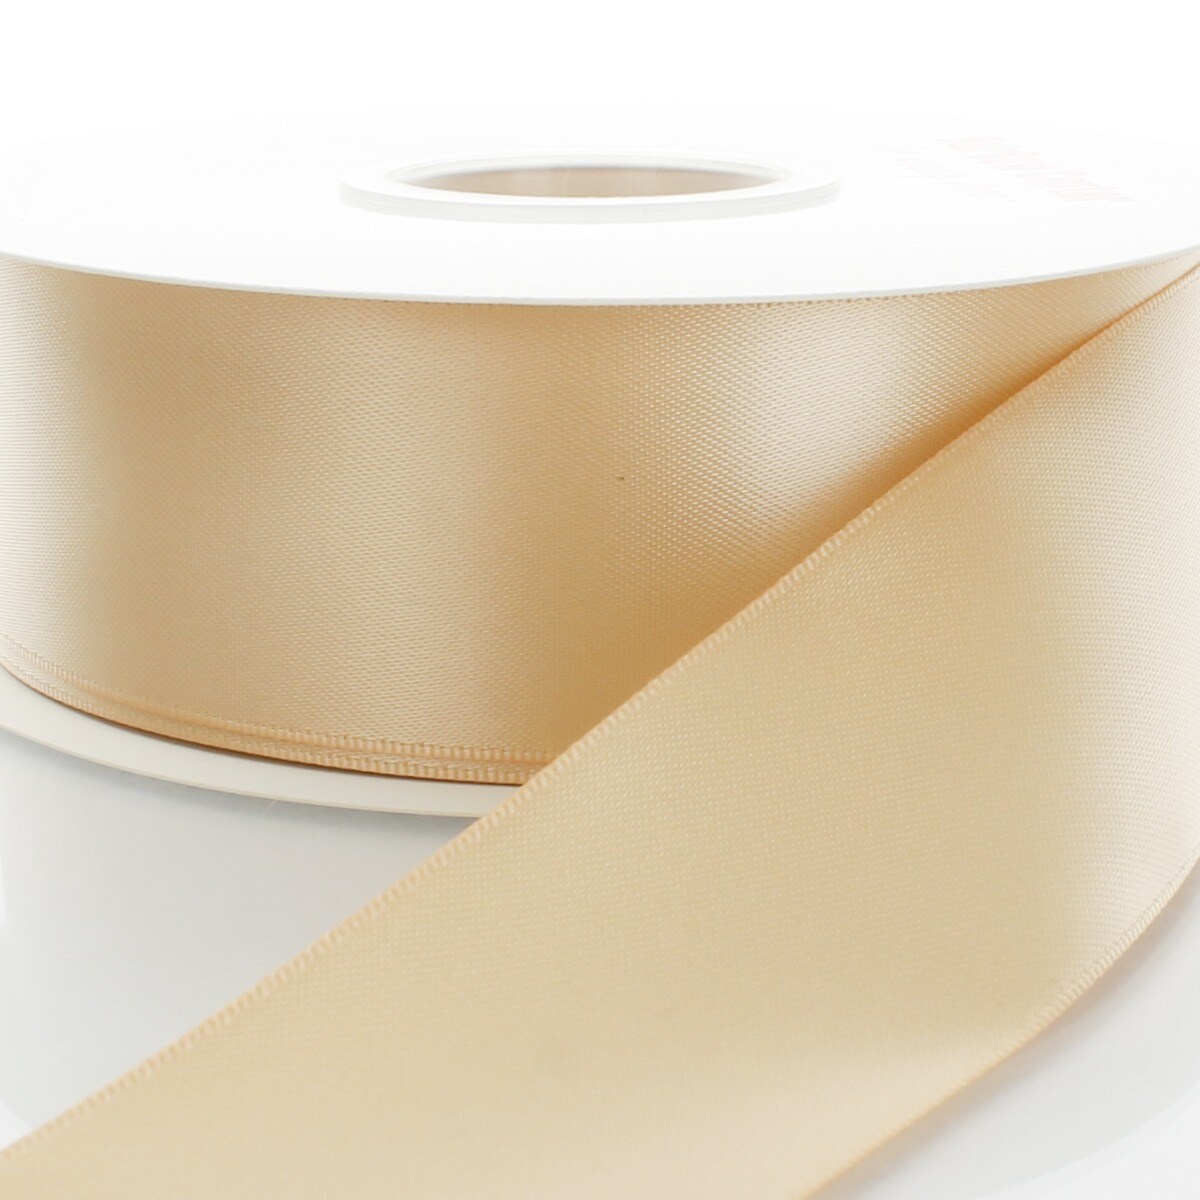 2.25 Double Faced Satin Ribbon 826 Light Gold 25yd